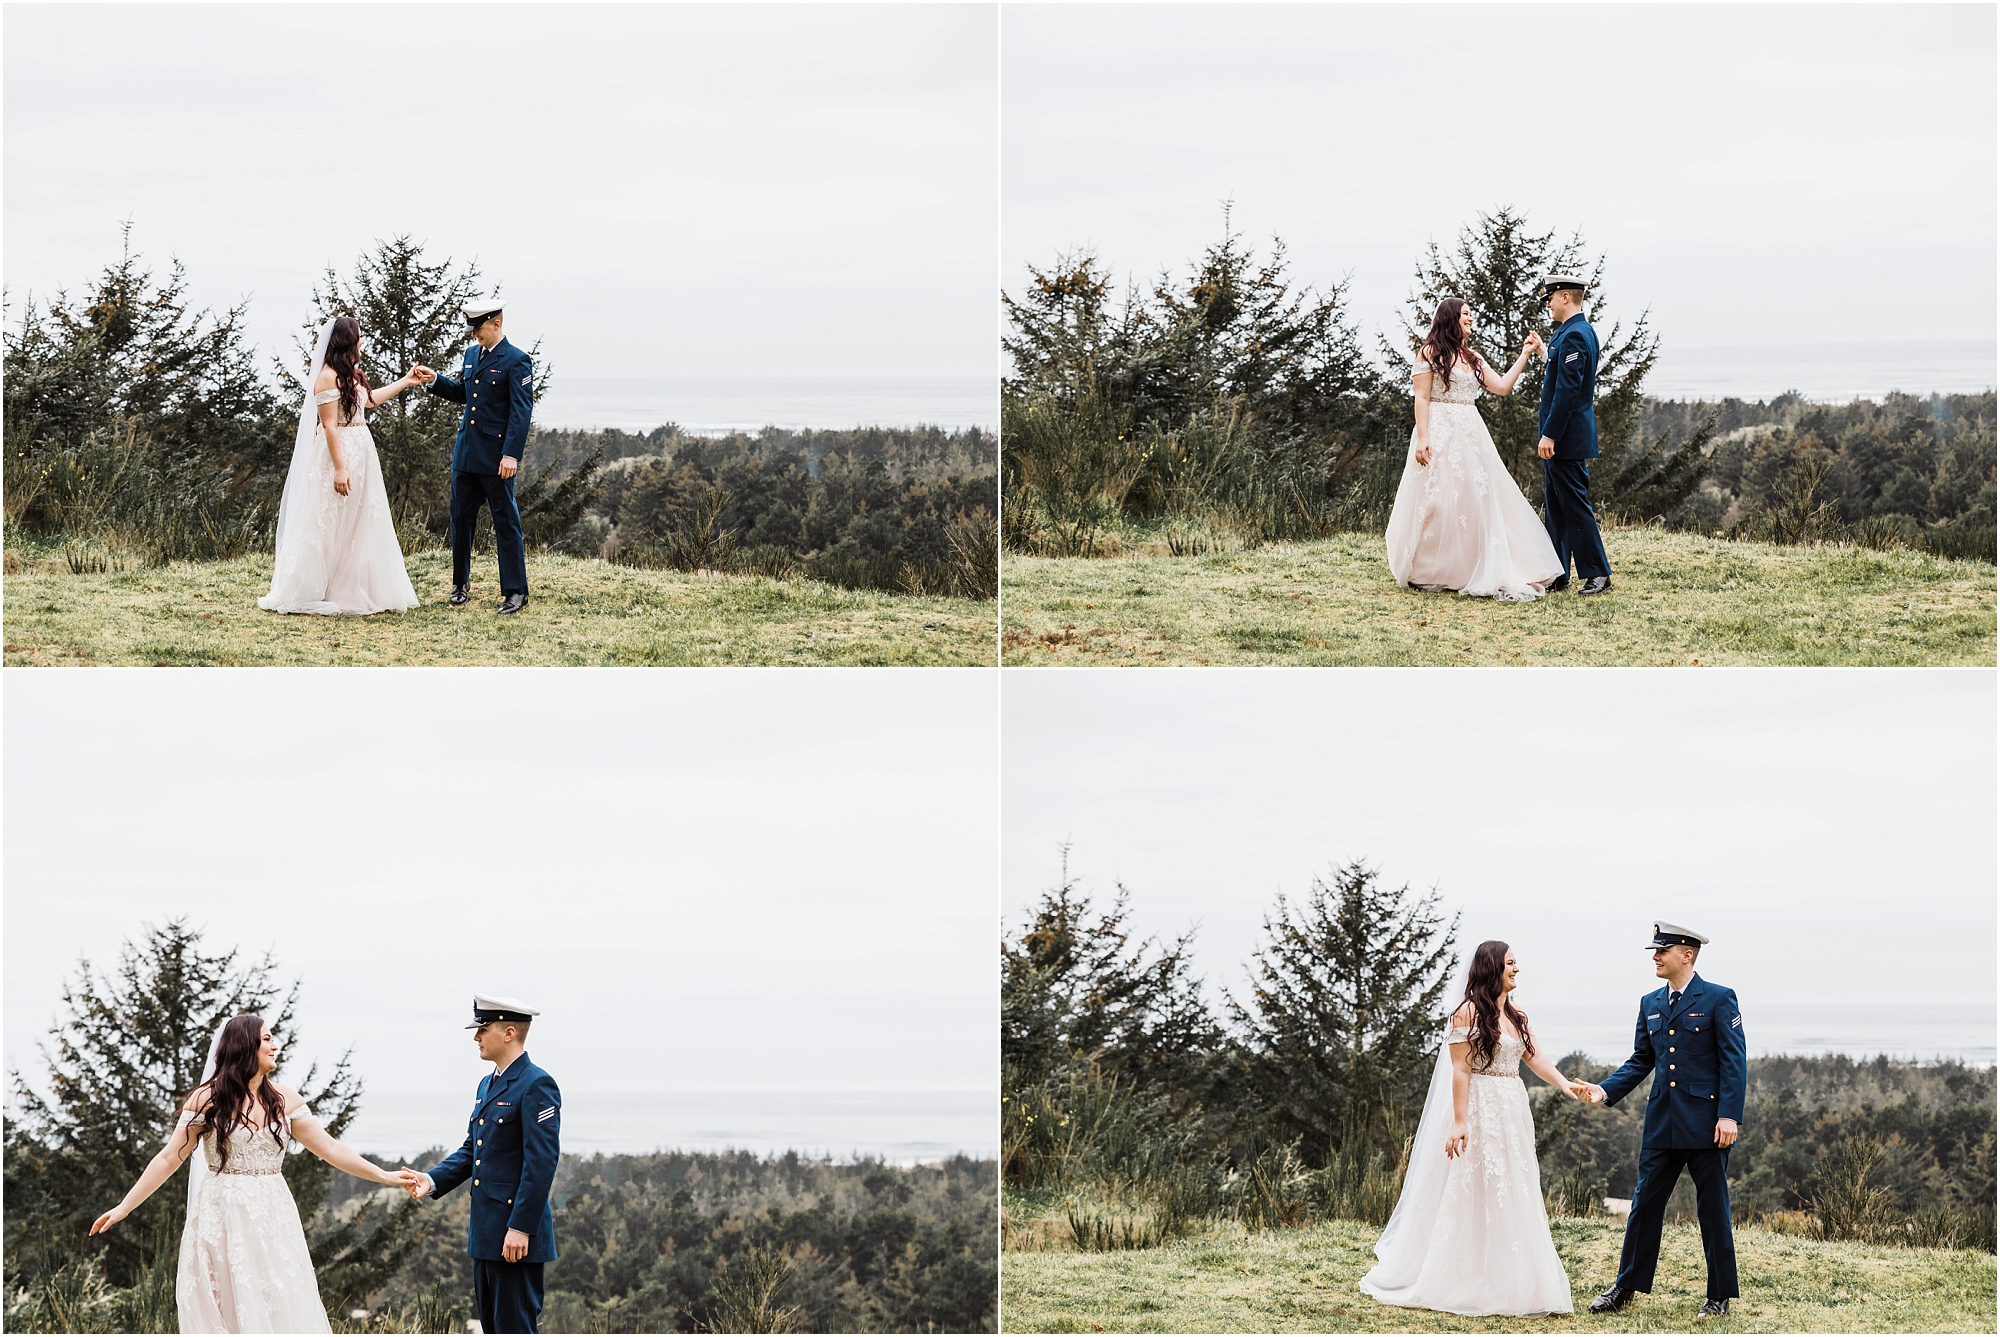 A groom, wearing his navy US Coast Guard uniform, and a bride wearing a blush pink off the shoulder gown, with a long white veil, pose together on a grassy overlook above the ocean for this Oregon Coast Guard Elopement in Winchester Bay. | Erica Swantek Photography